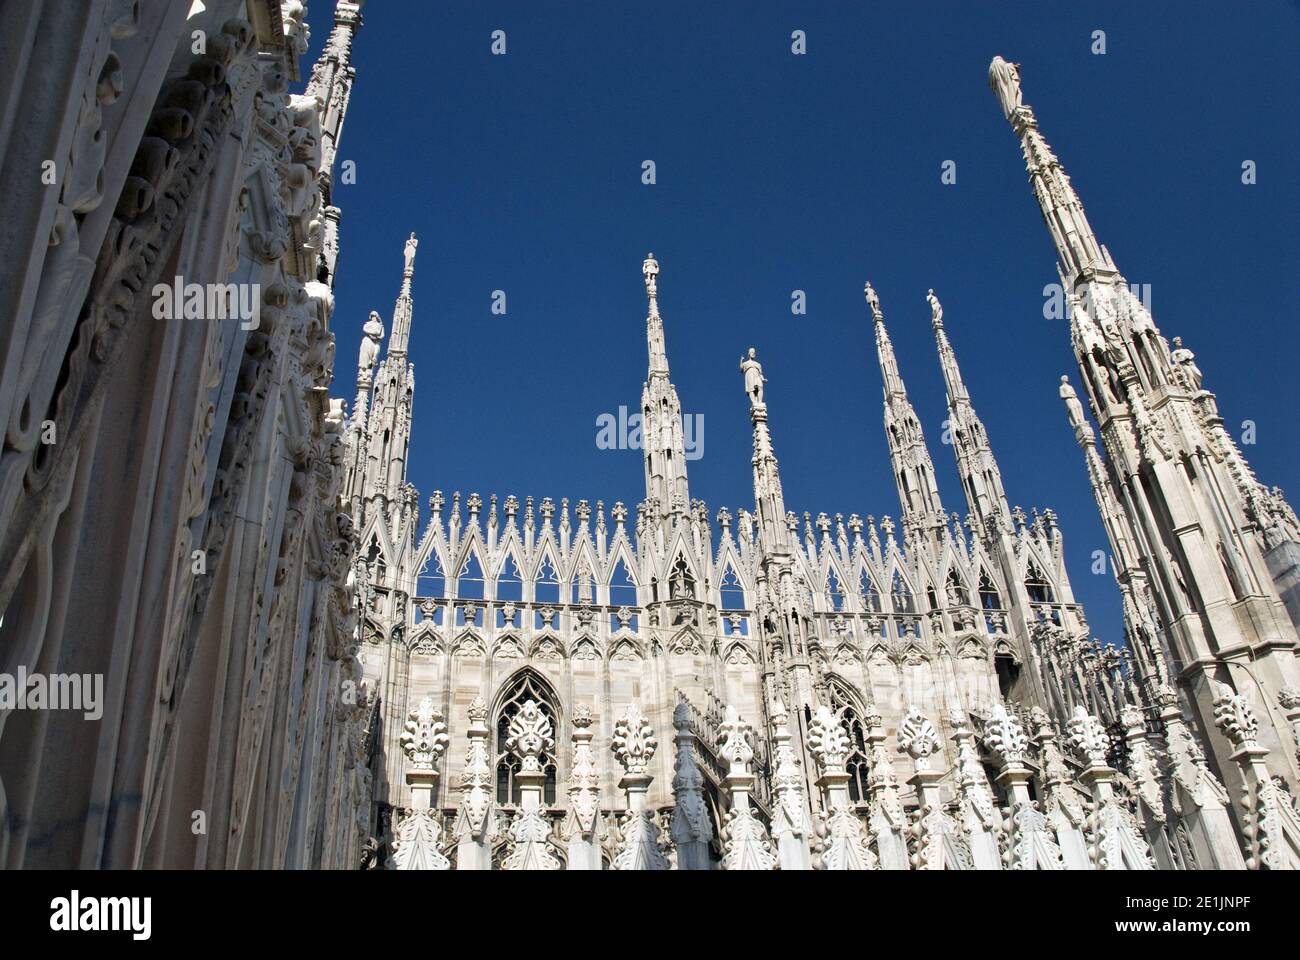 The Milan Cathedral (Duomo di Milano) is renowned for its openwork pinnacles and spires, set upon delicate flying buttresses. Stock Photo